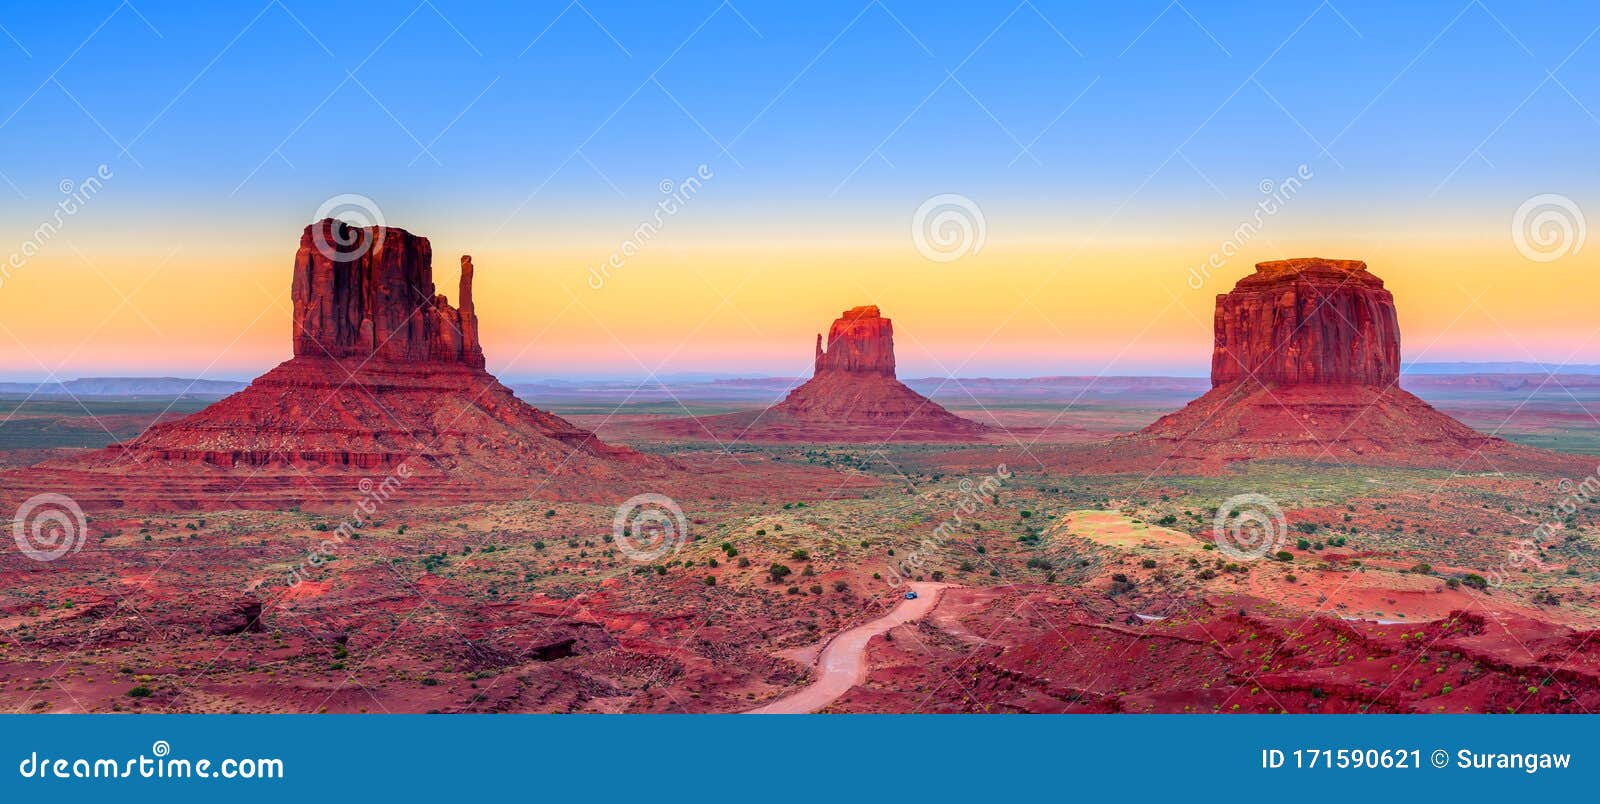 sunset at monument valley, usa